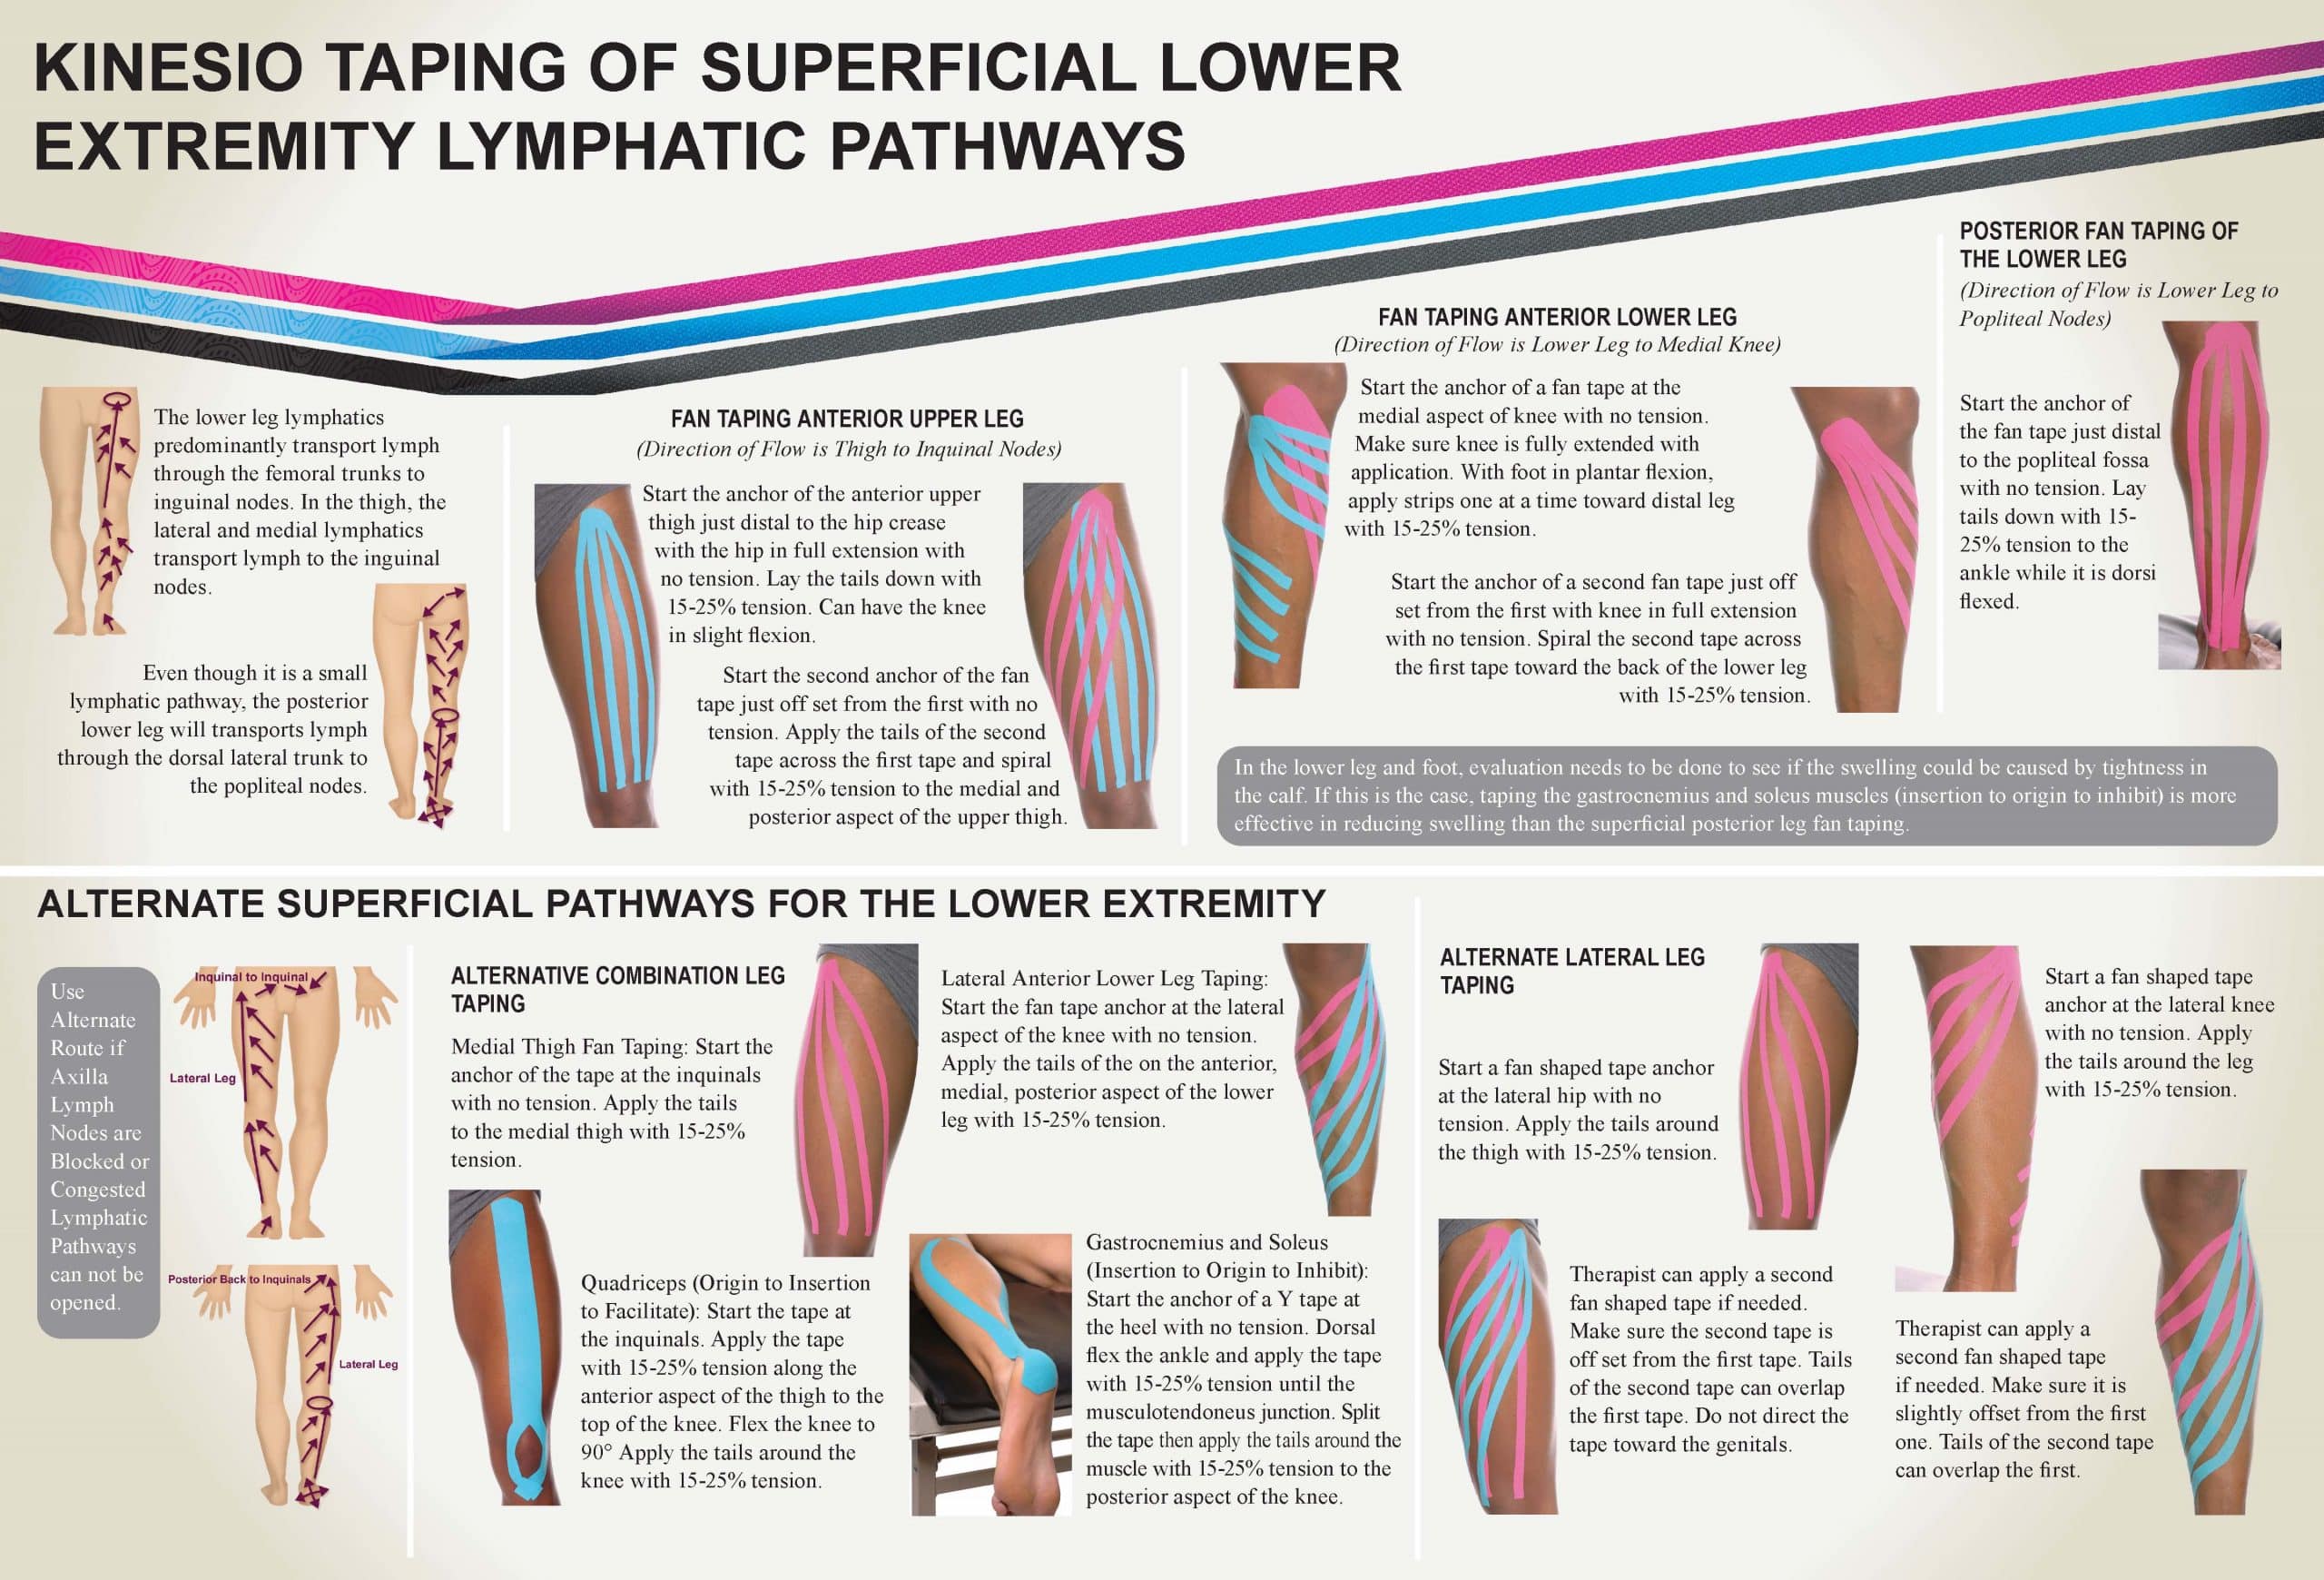 vidnesbyrd Palads alarm Kinesio Taping Of Superficial Lower Extremity Lymphatic Pathways - Kinesio